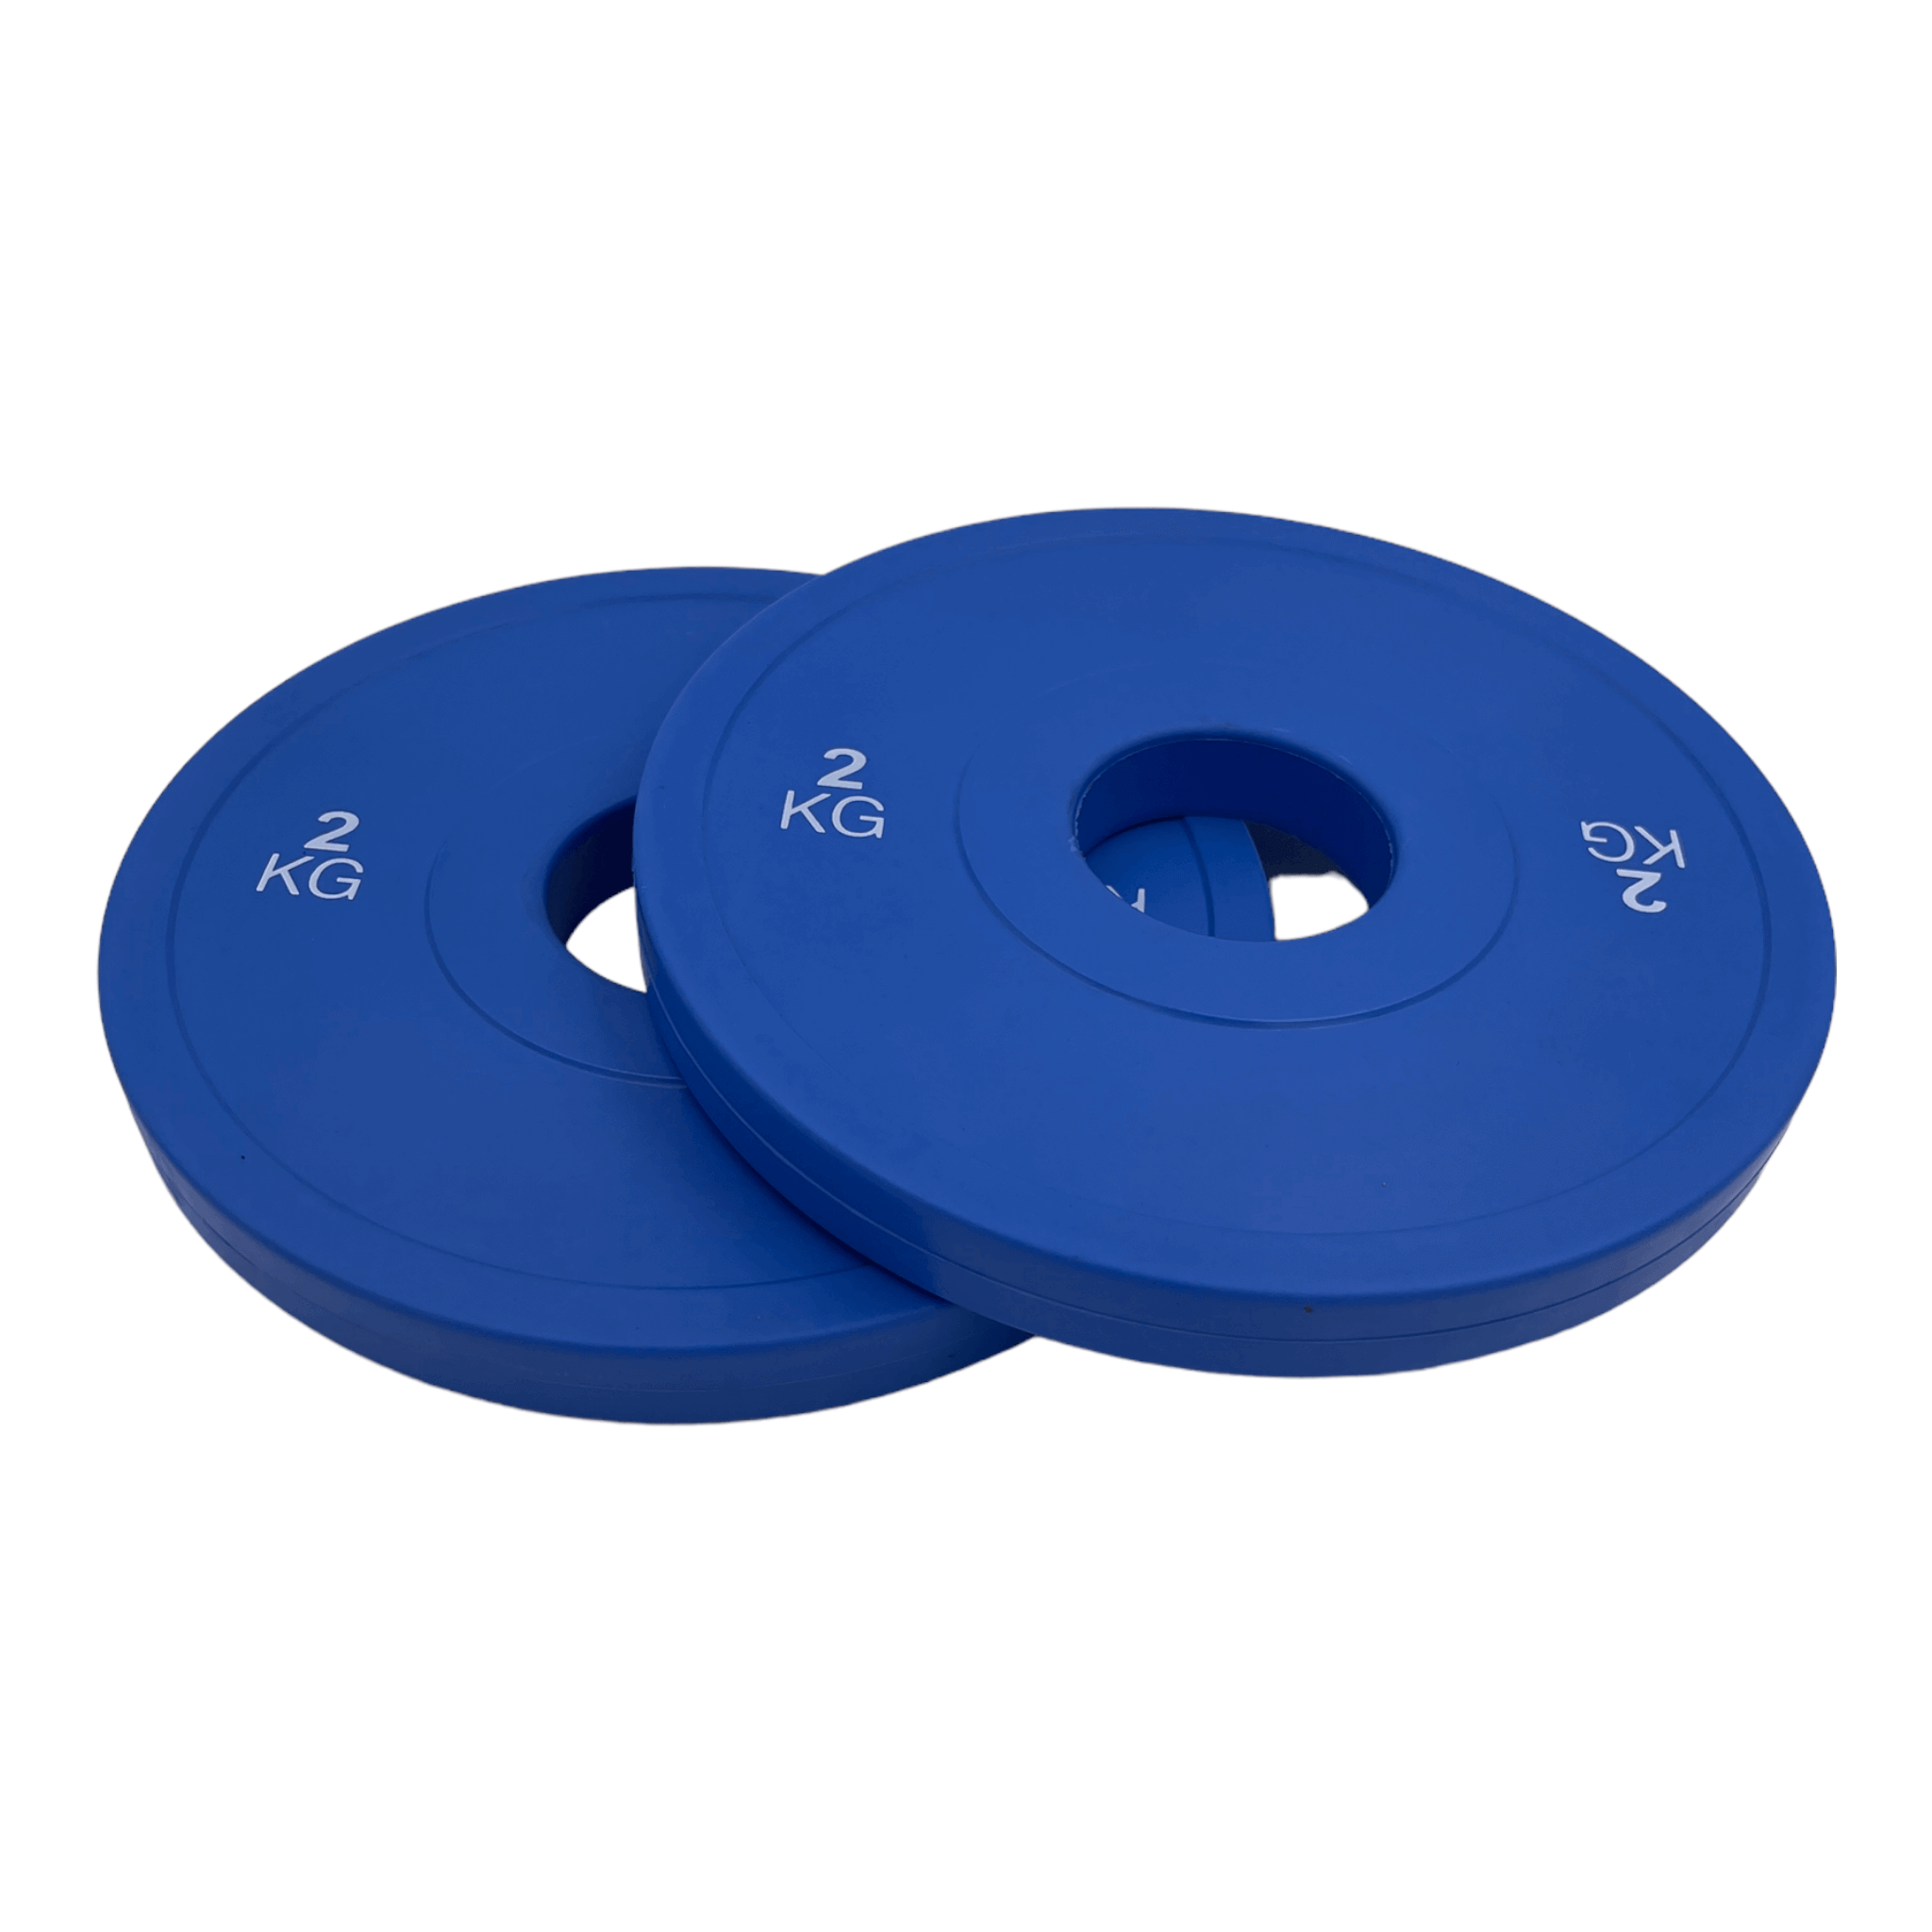 2kg Fractional Change Plates Rubber Weight Plates Pair | INSOURCE